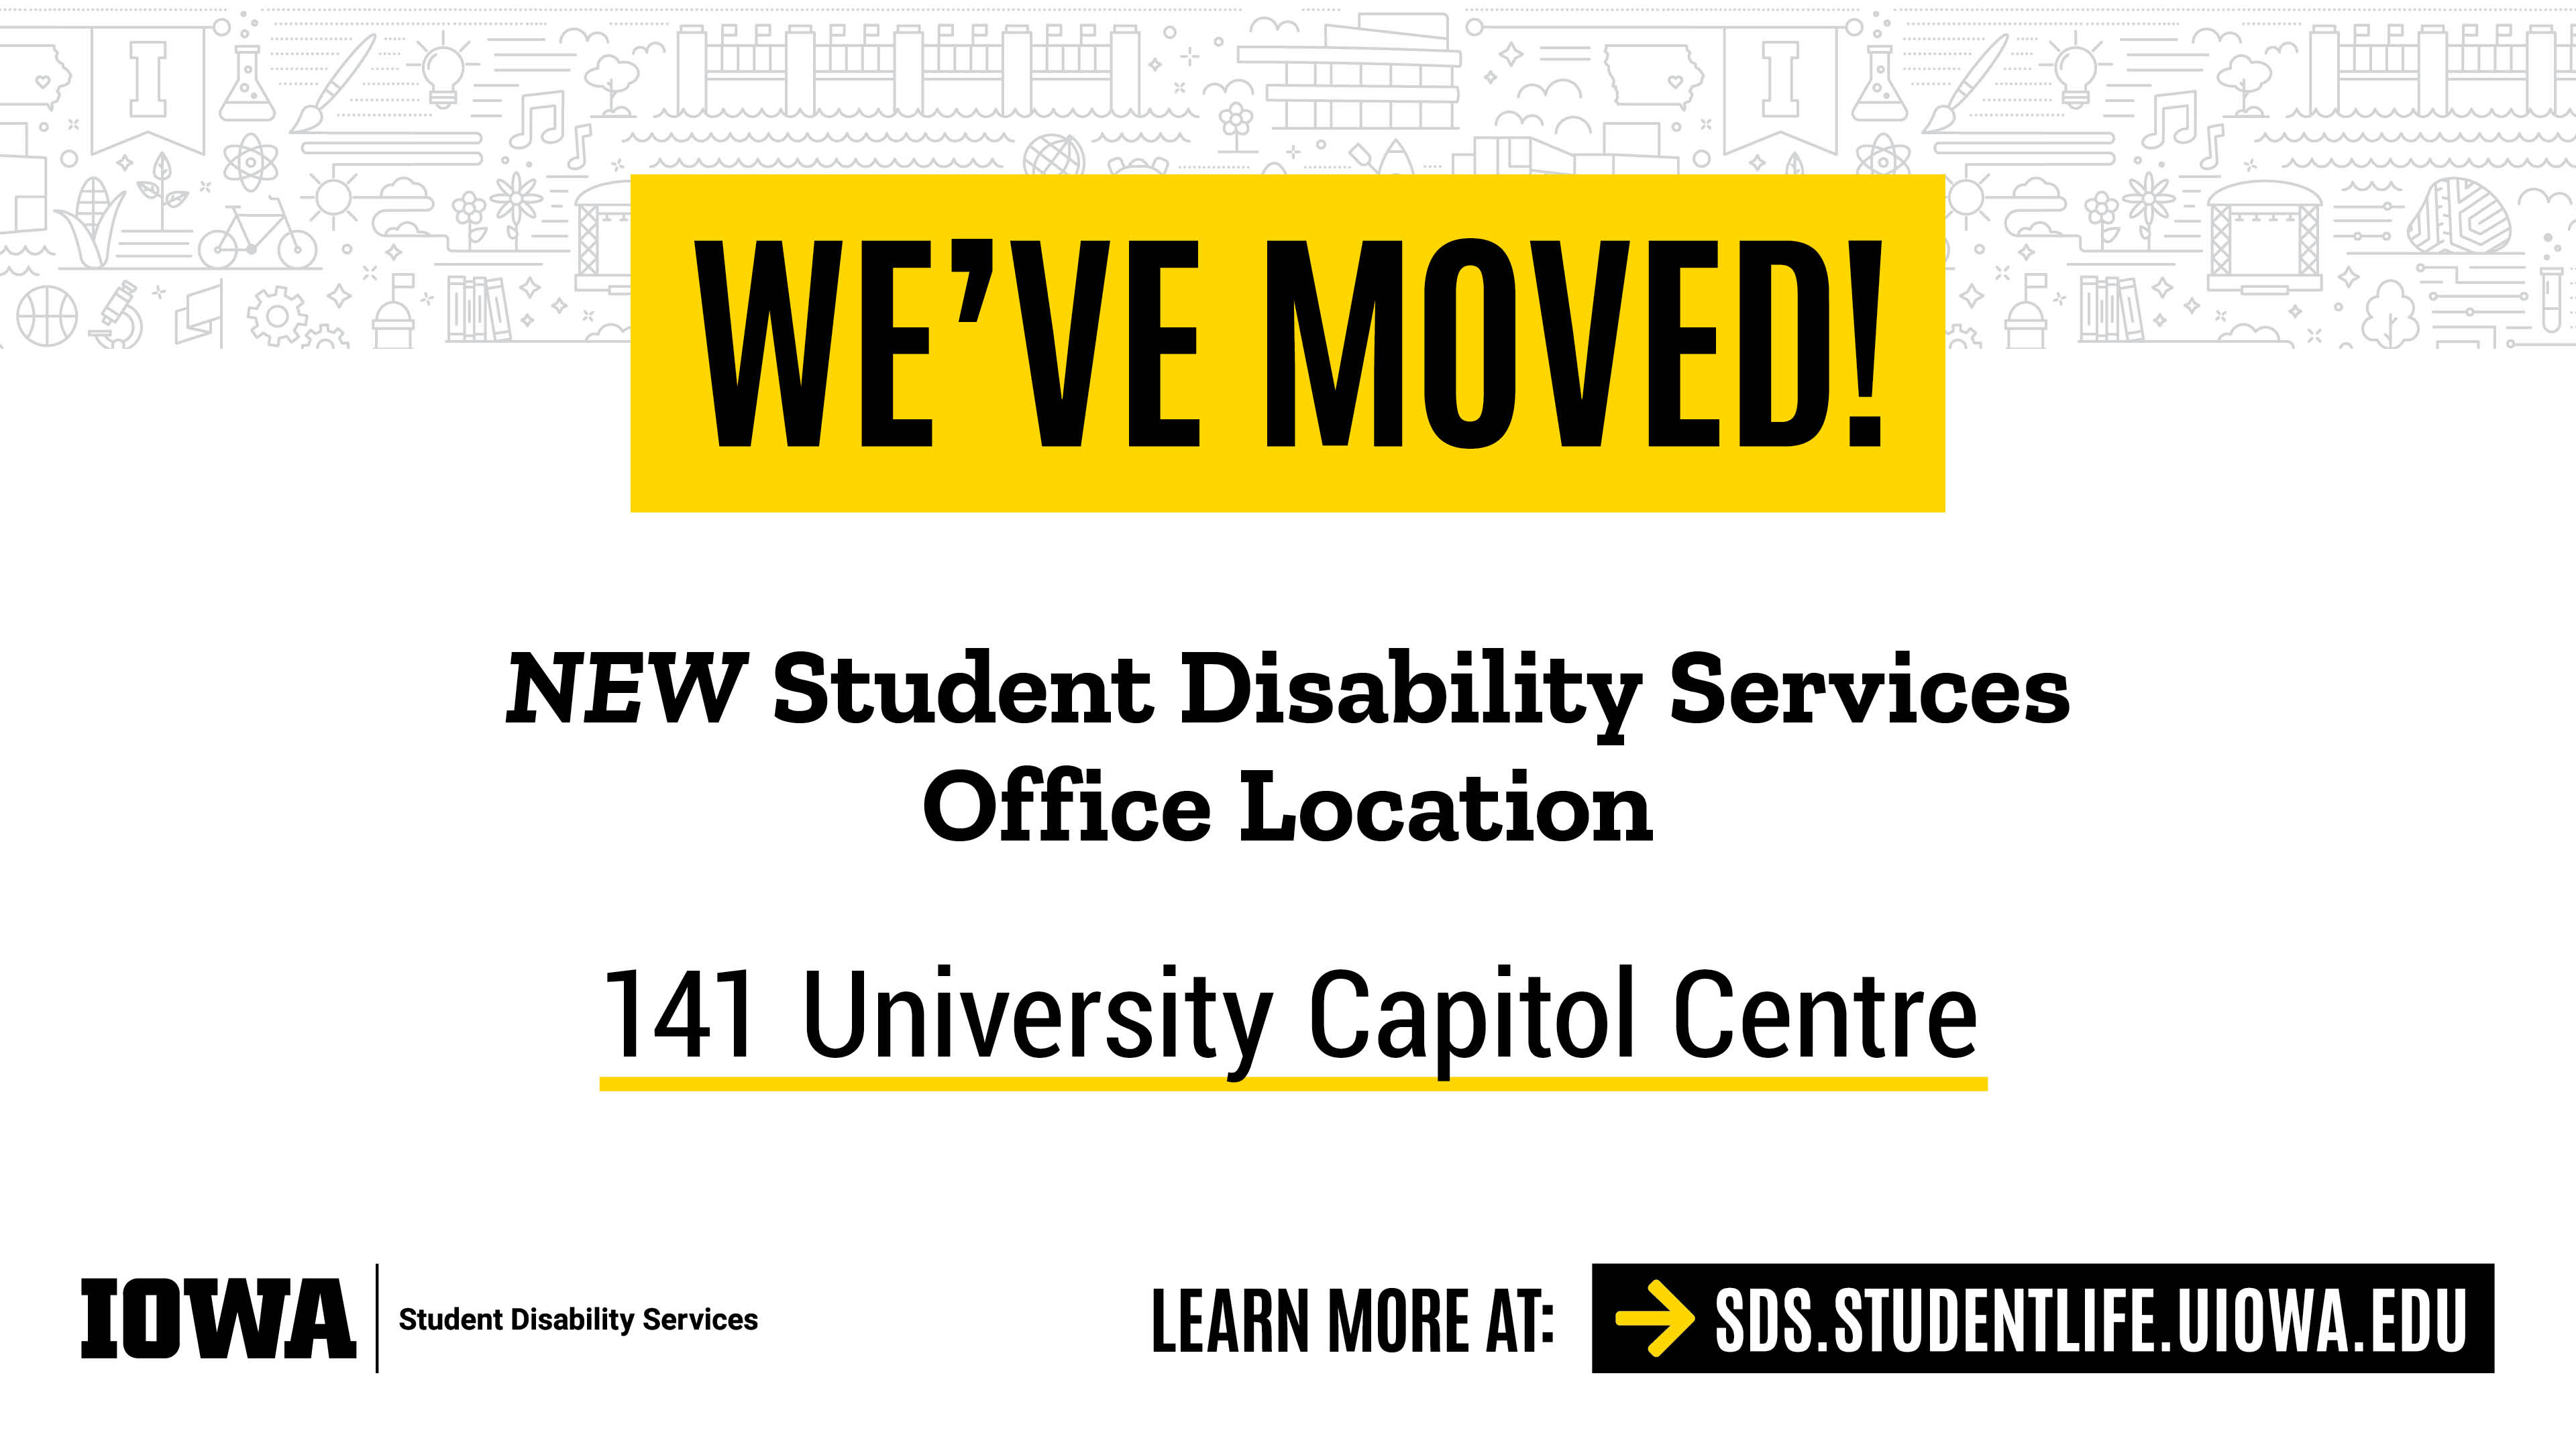 We've moved! NEW Student Disability Services Office Location. 141 University Capitol Centre. IOWA | Student Disability Services. Learn more at SDS.STUDENTLIFE.UIOWA.EDU